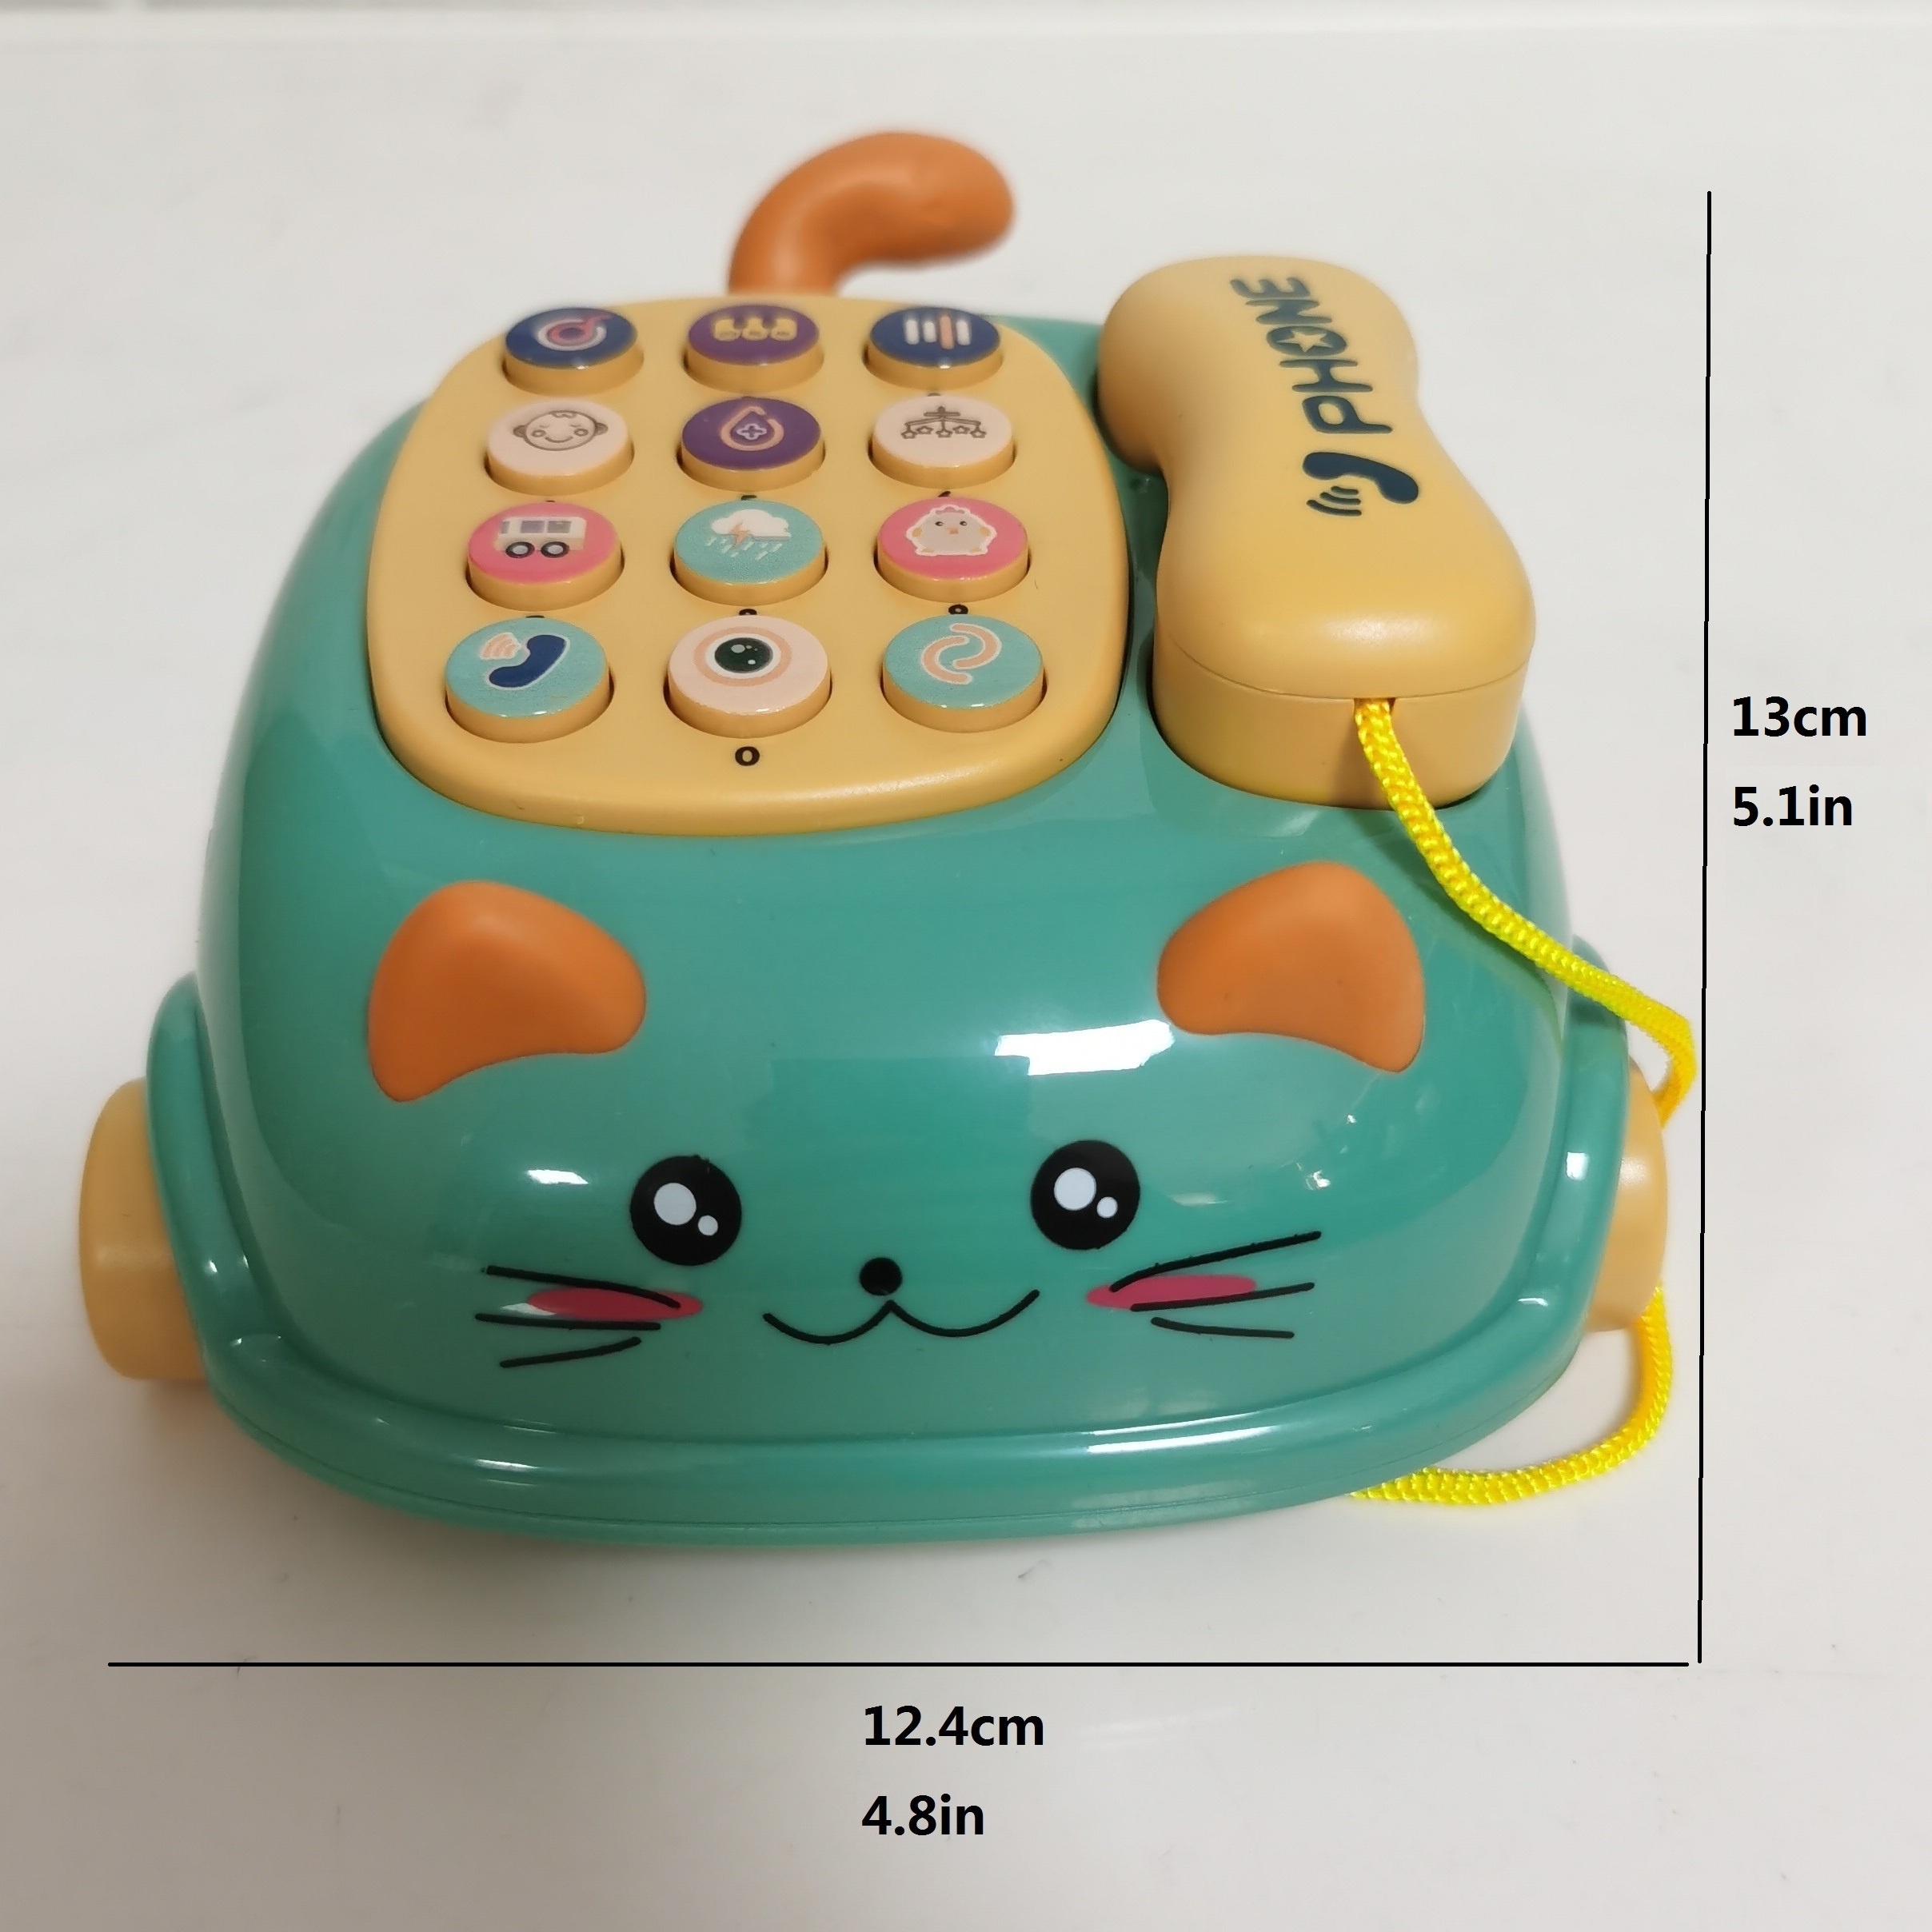 Toy Phones For Kids & Babies